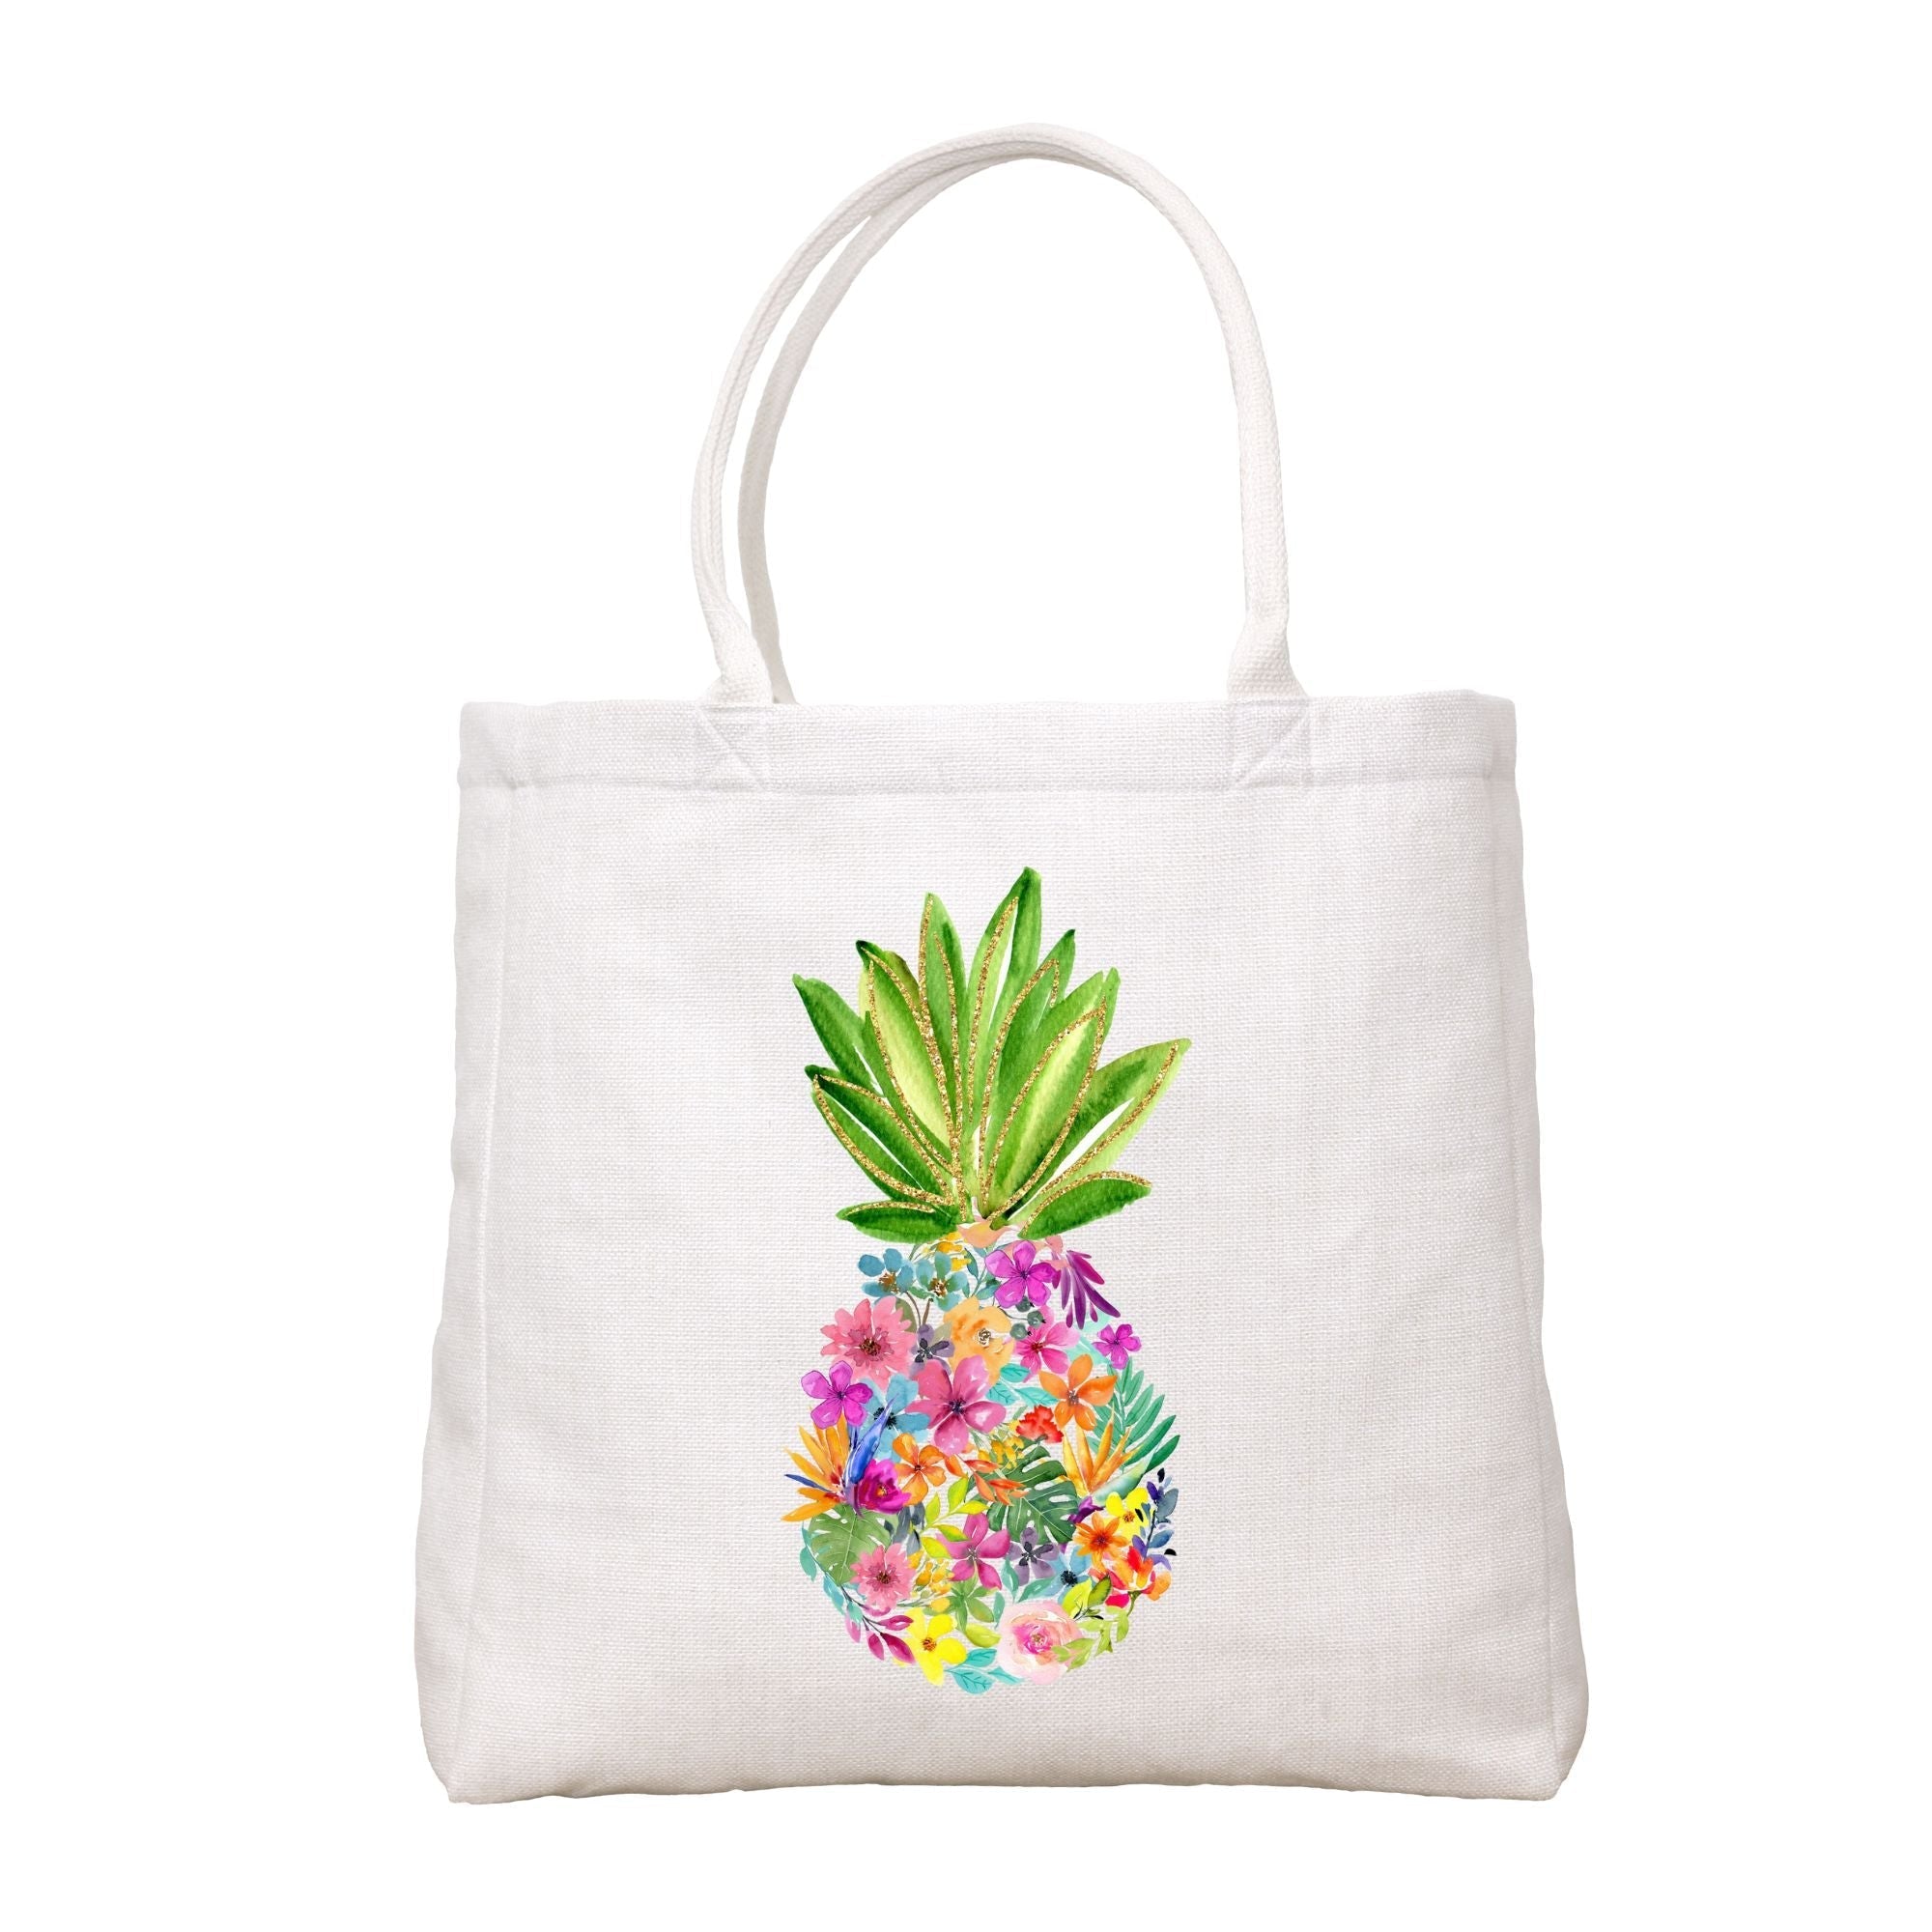 Abstract Pineapple Tote Bag